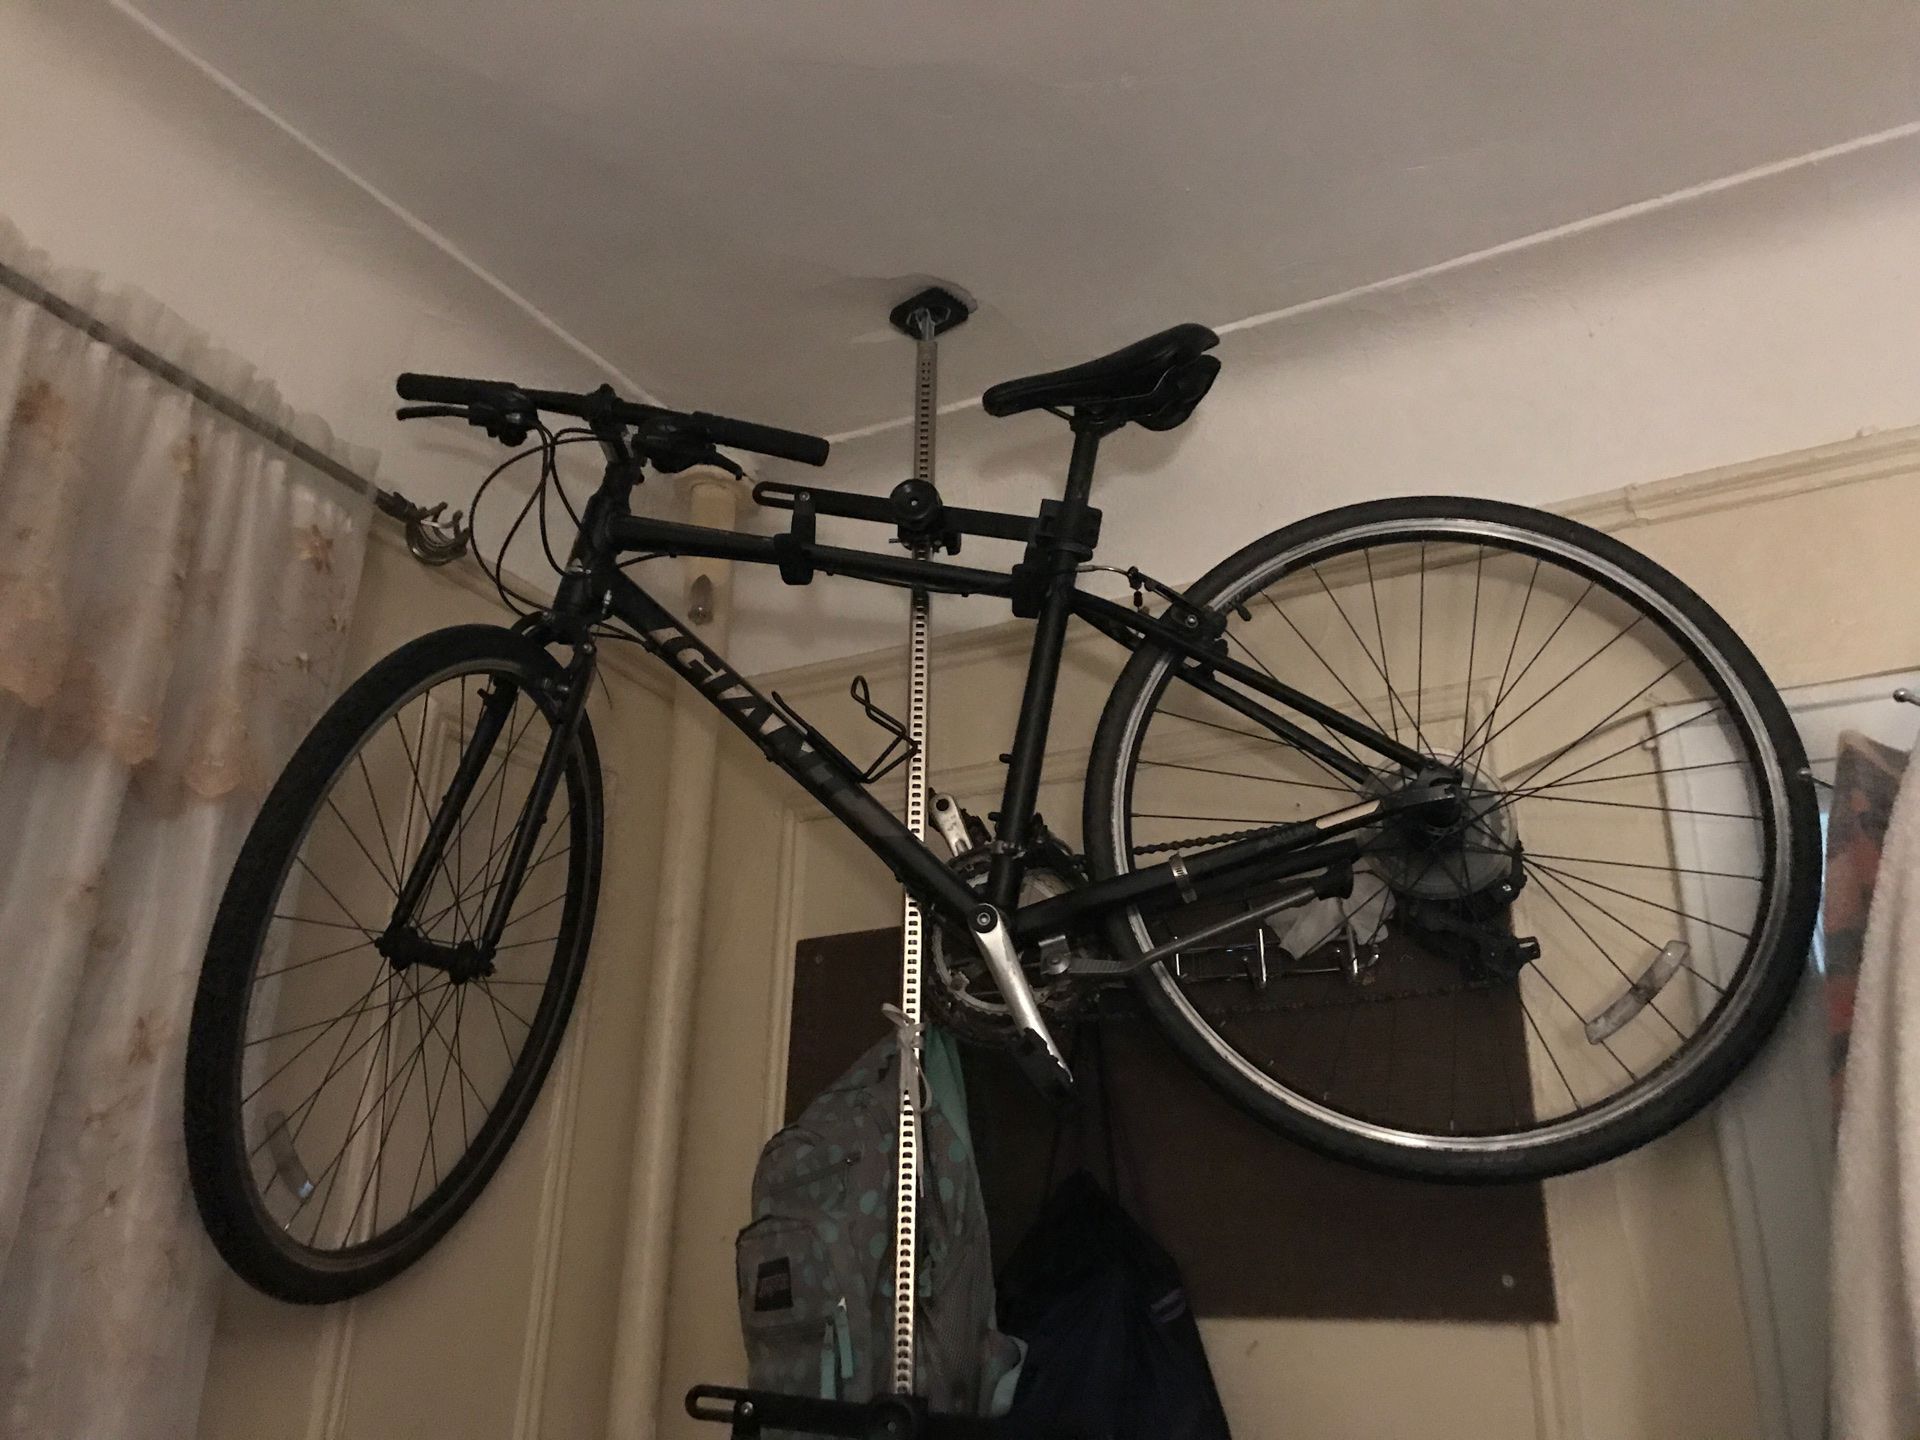 Giant Bike For Sale and perfect Condition and some Scratches